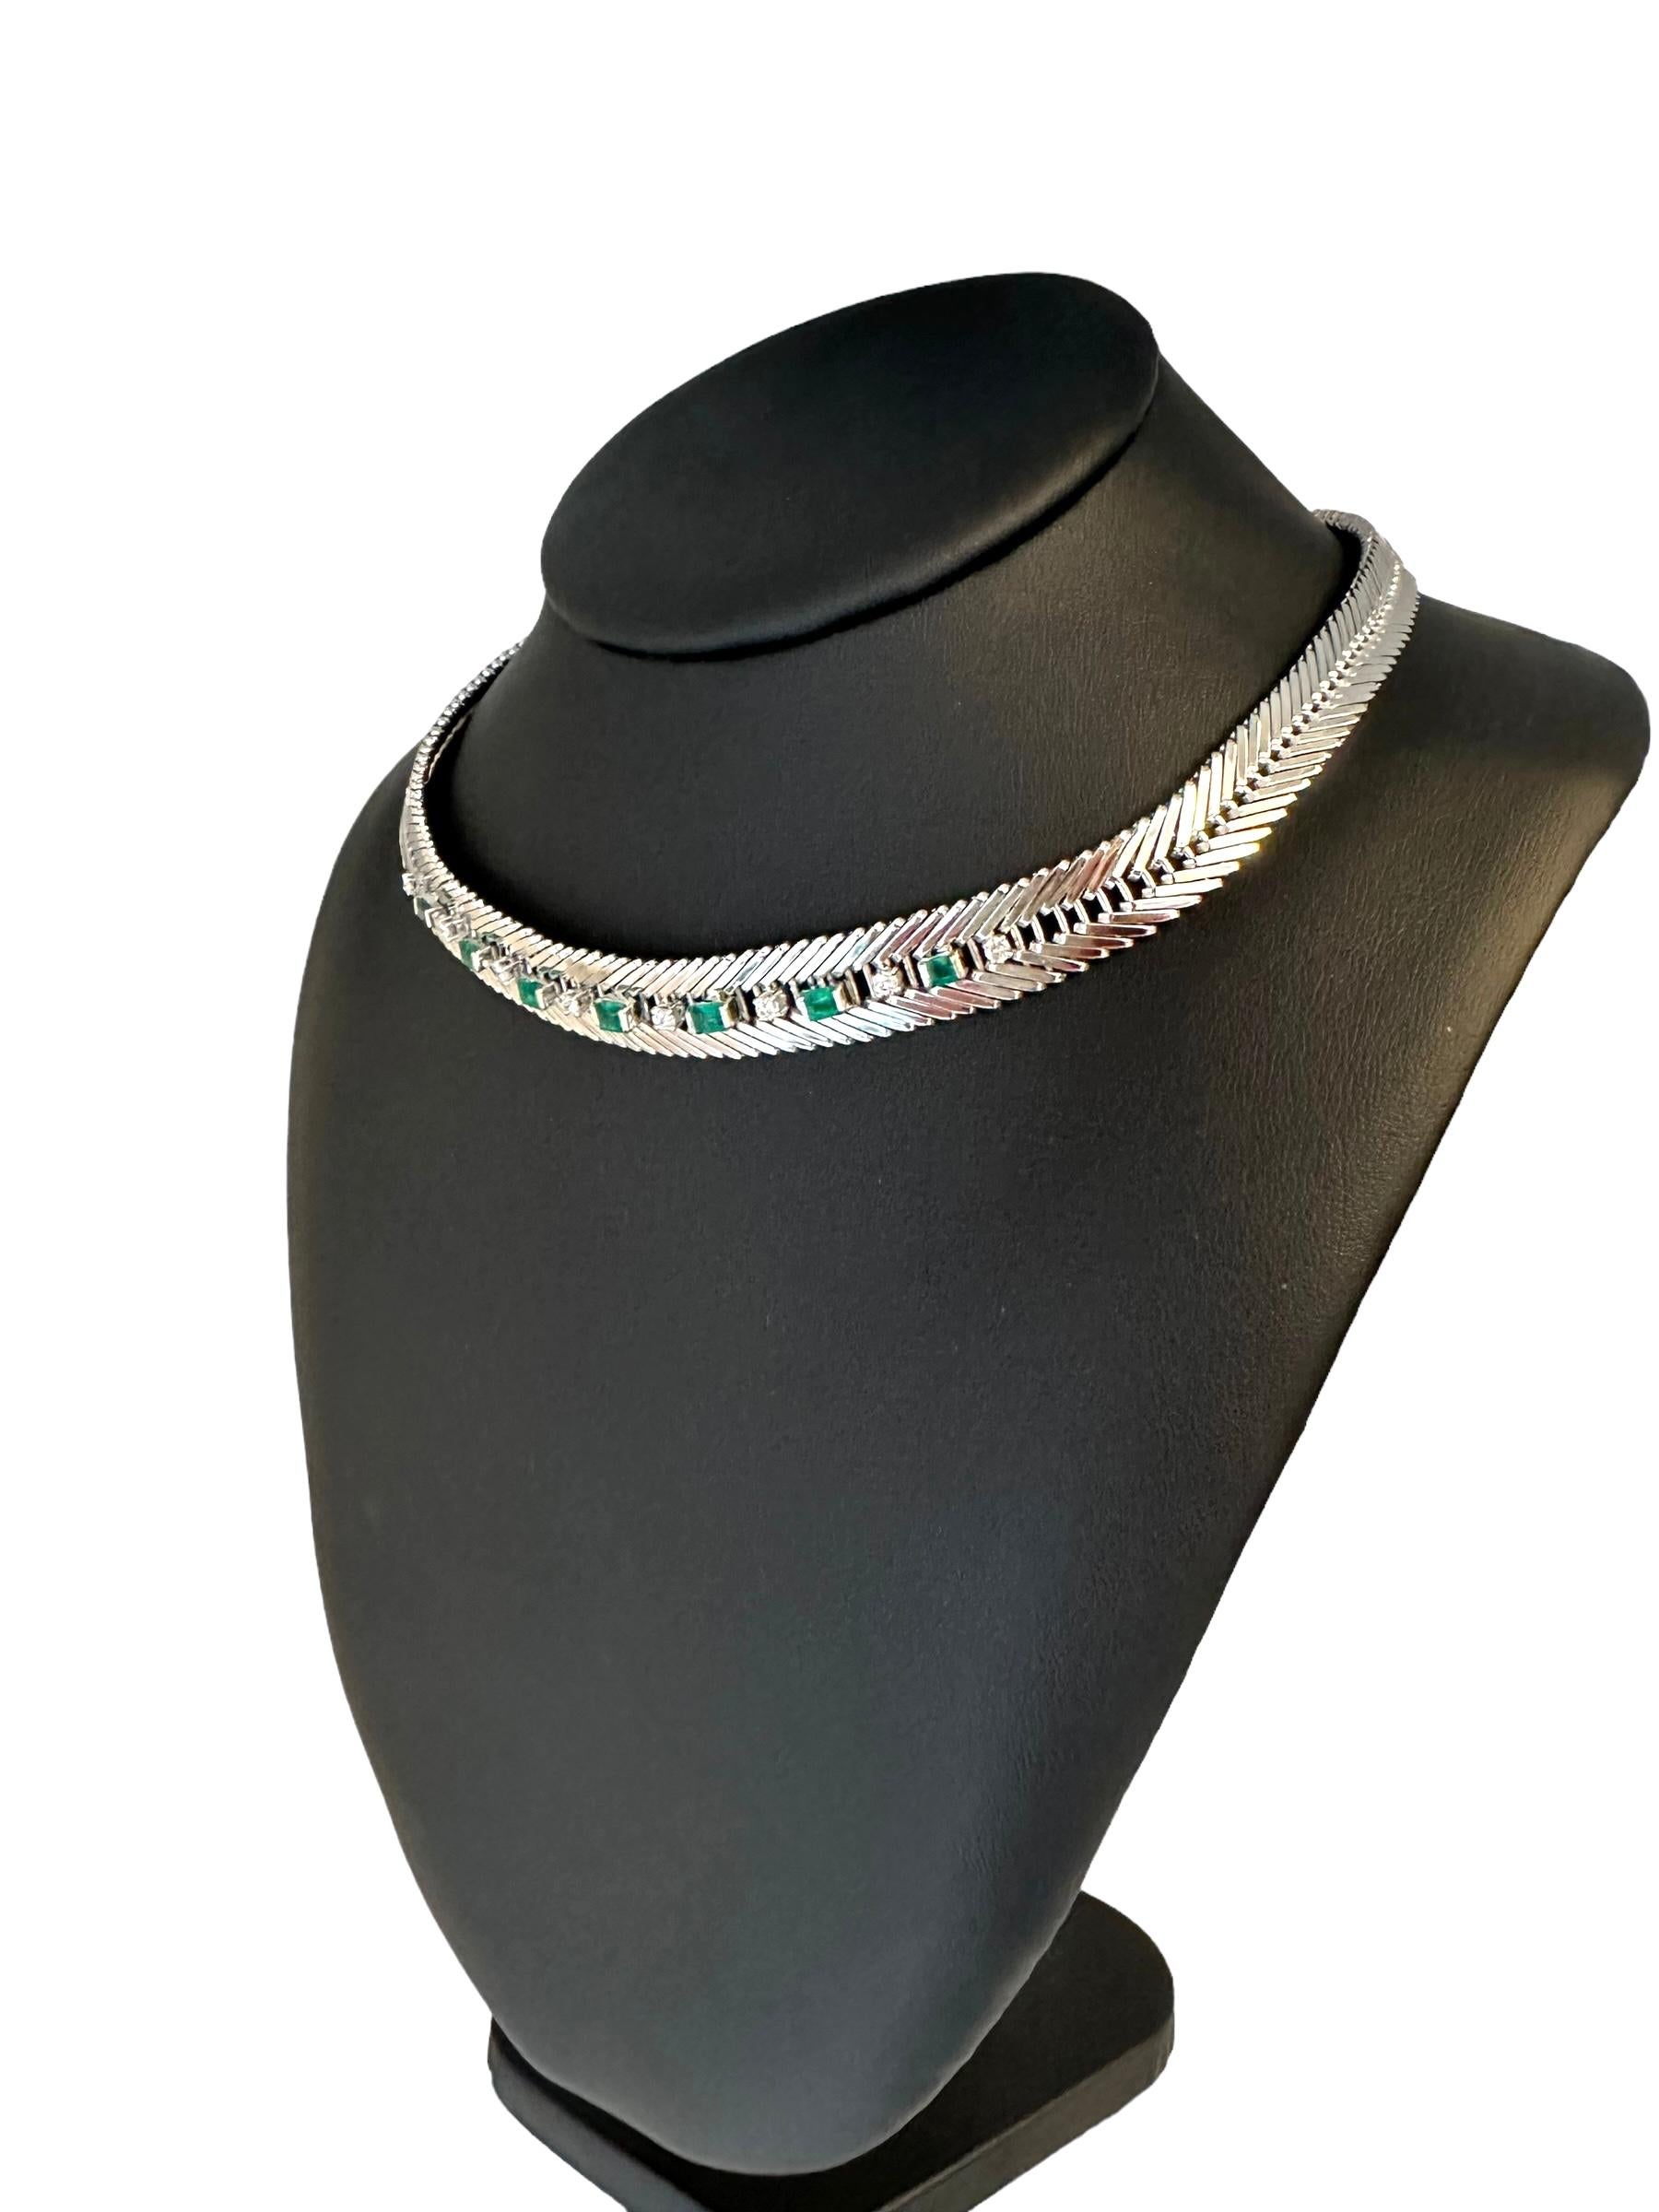 IGI Certified White Gold Diamonds and Emeralds Italian Choker Necklace For Sale 2